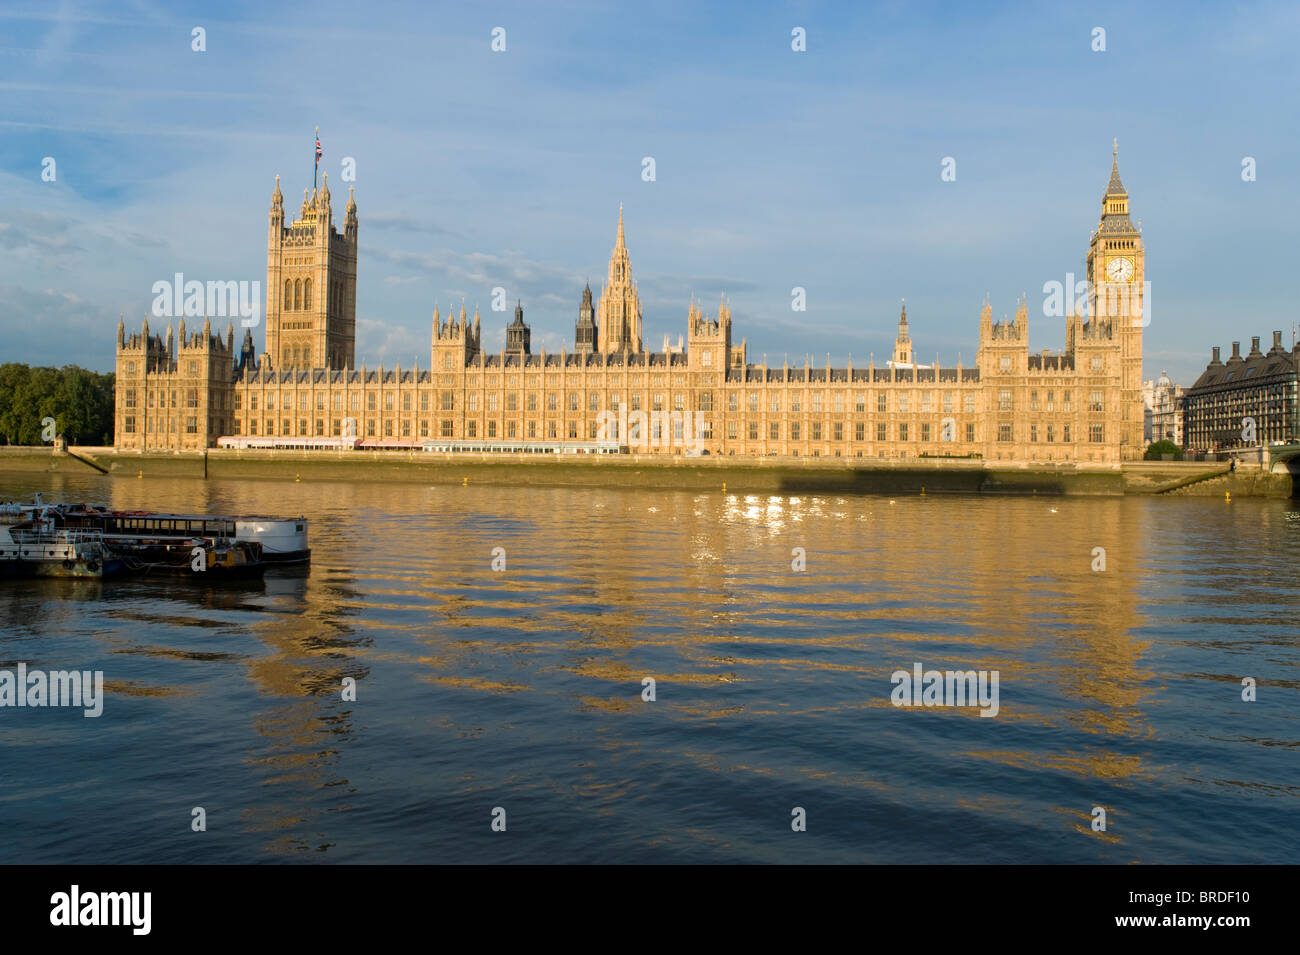 The Houses of Parliament or the Palace of Westminster next to the river Thames in London, England UK Stock Photo